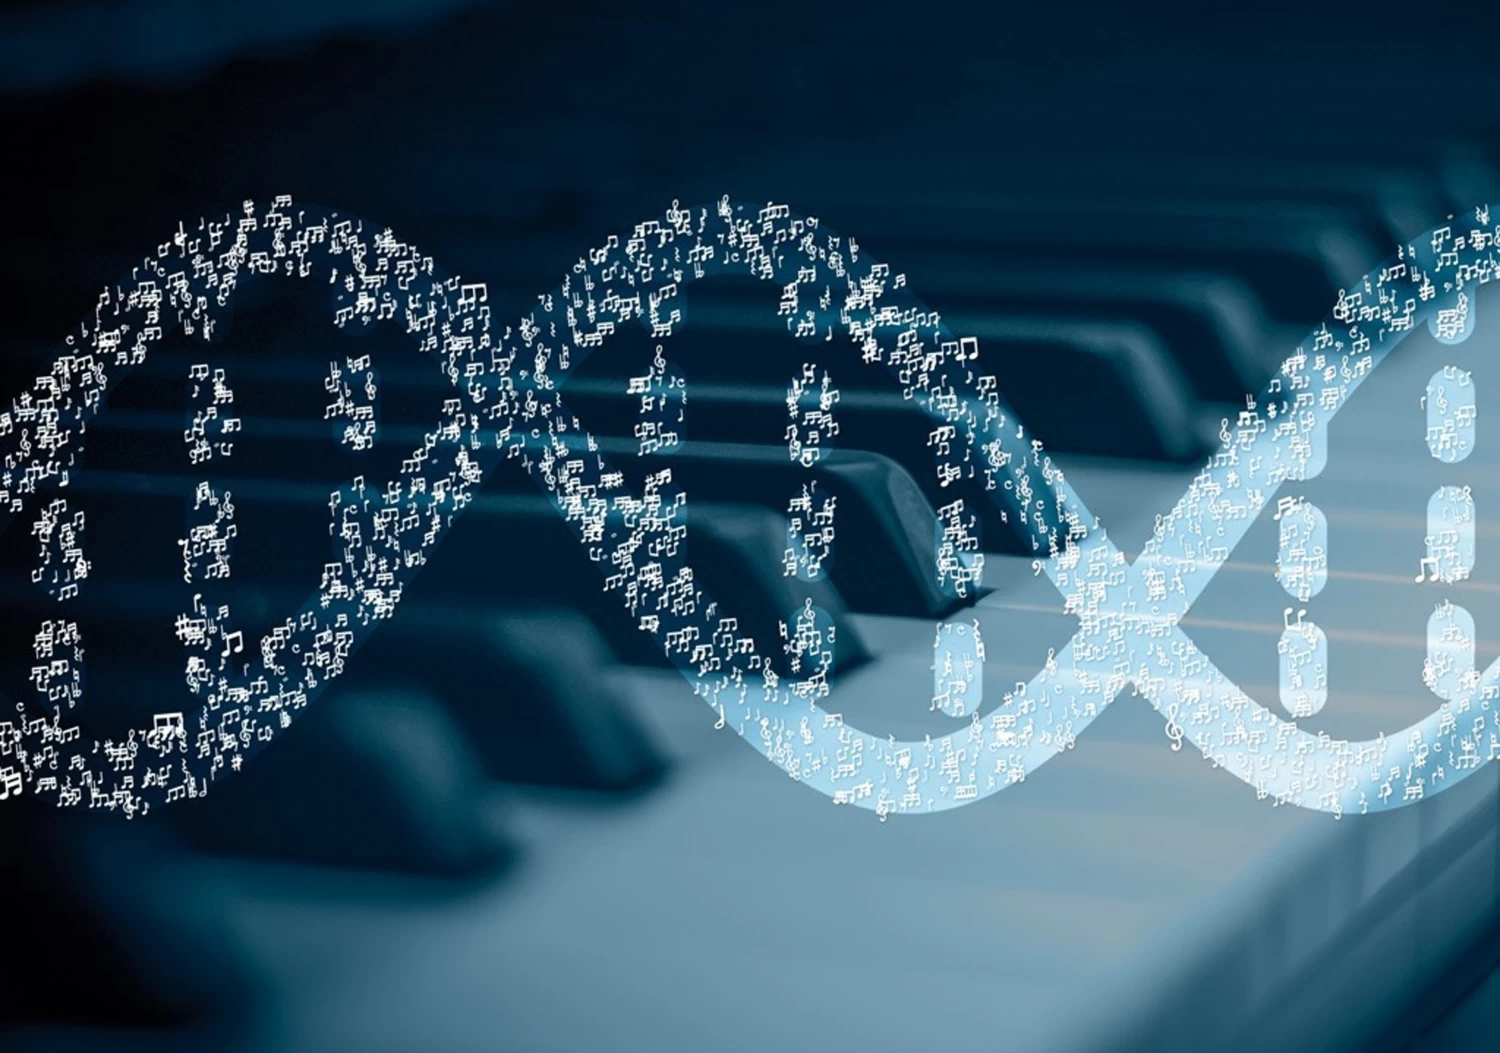 Decorative image representinga a musical DNA spiral that is used in presentations of the research group's work on the genetics of music.